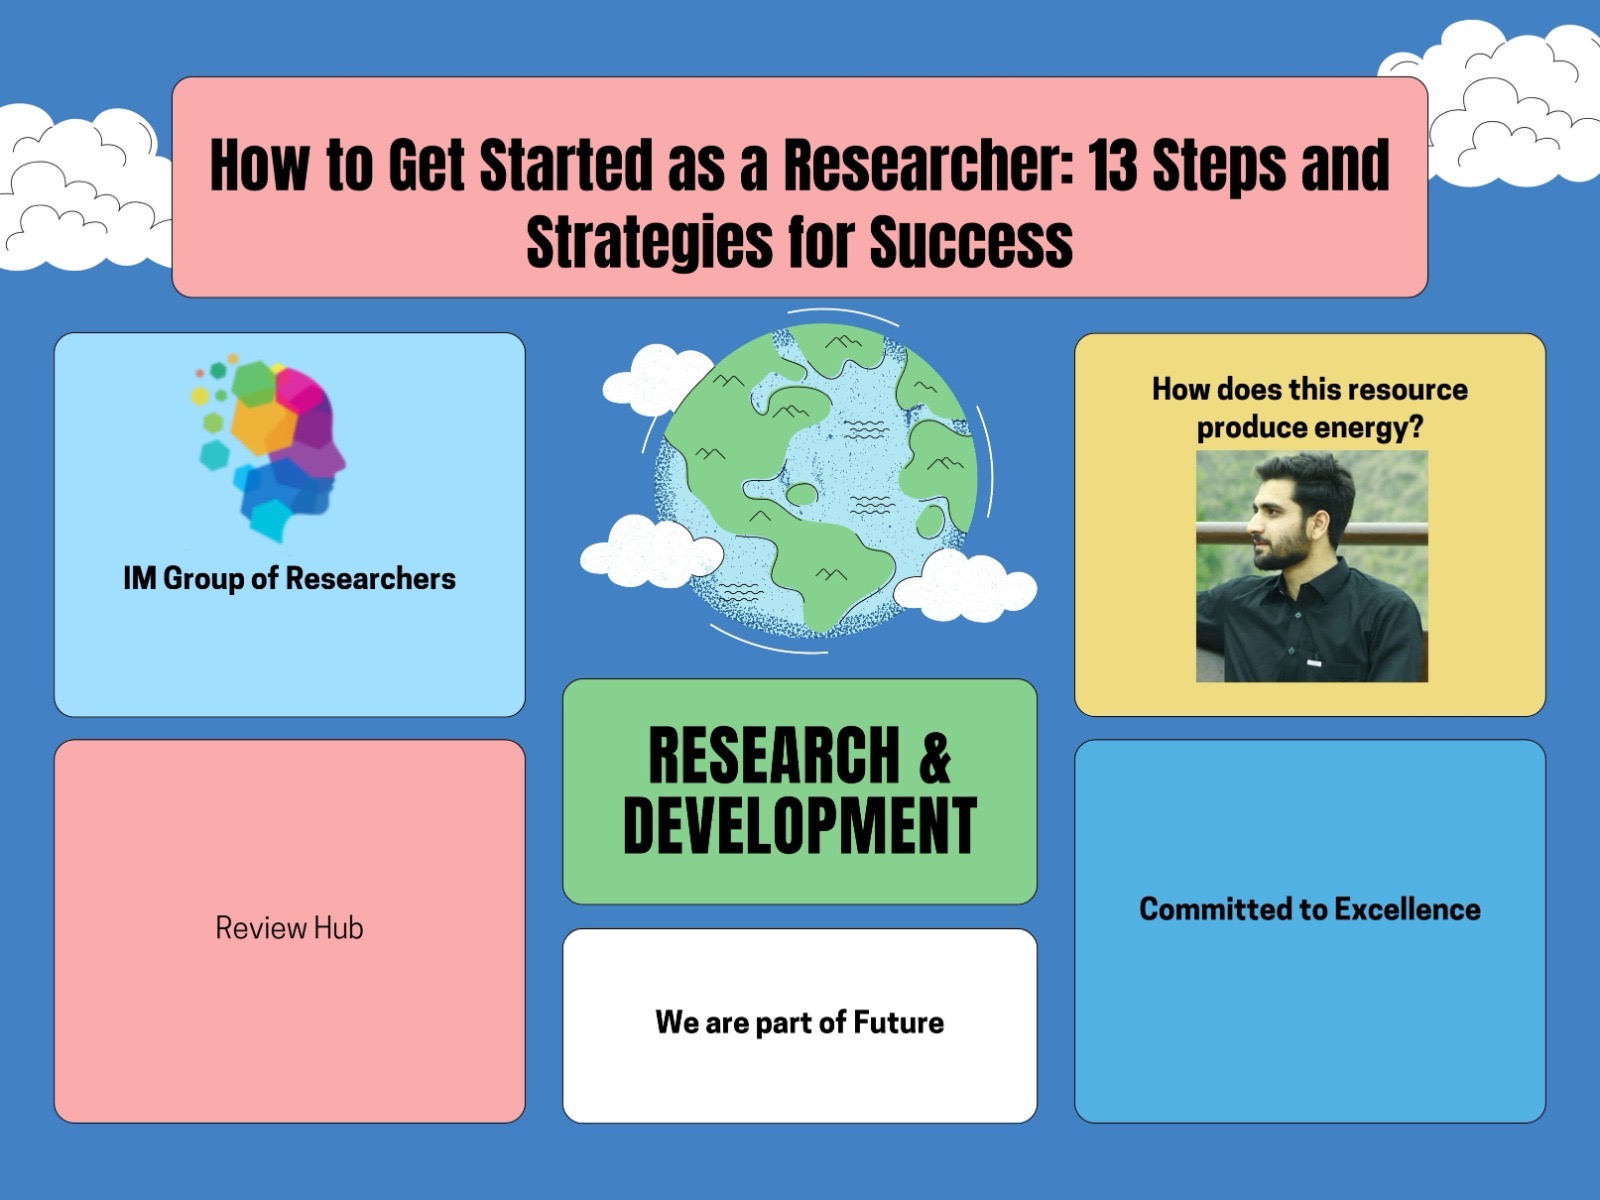 How to Get Started as a Researcher: 13 Steps and Strategies for Success